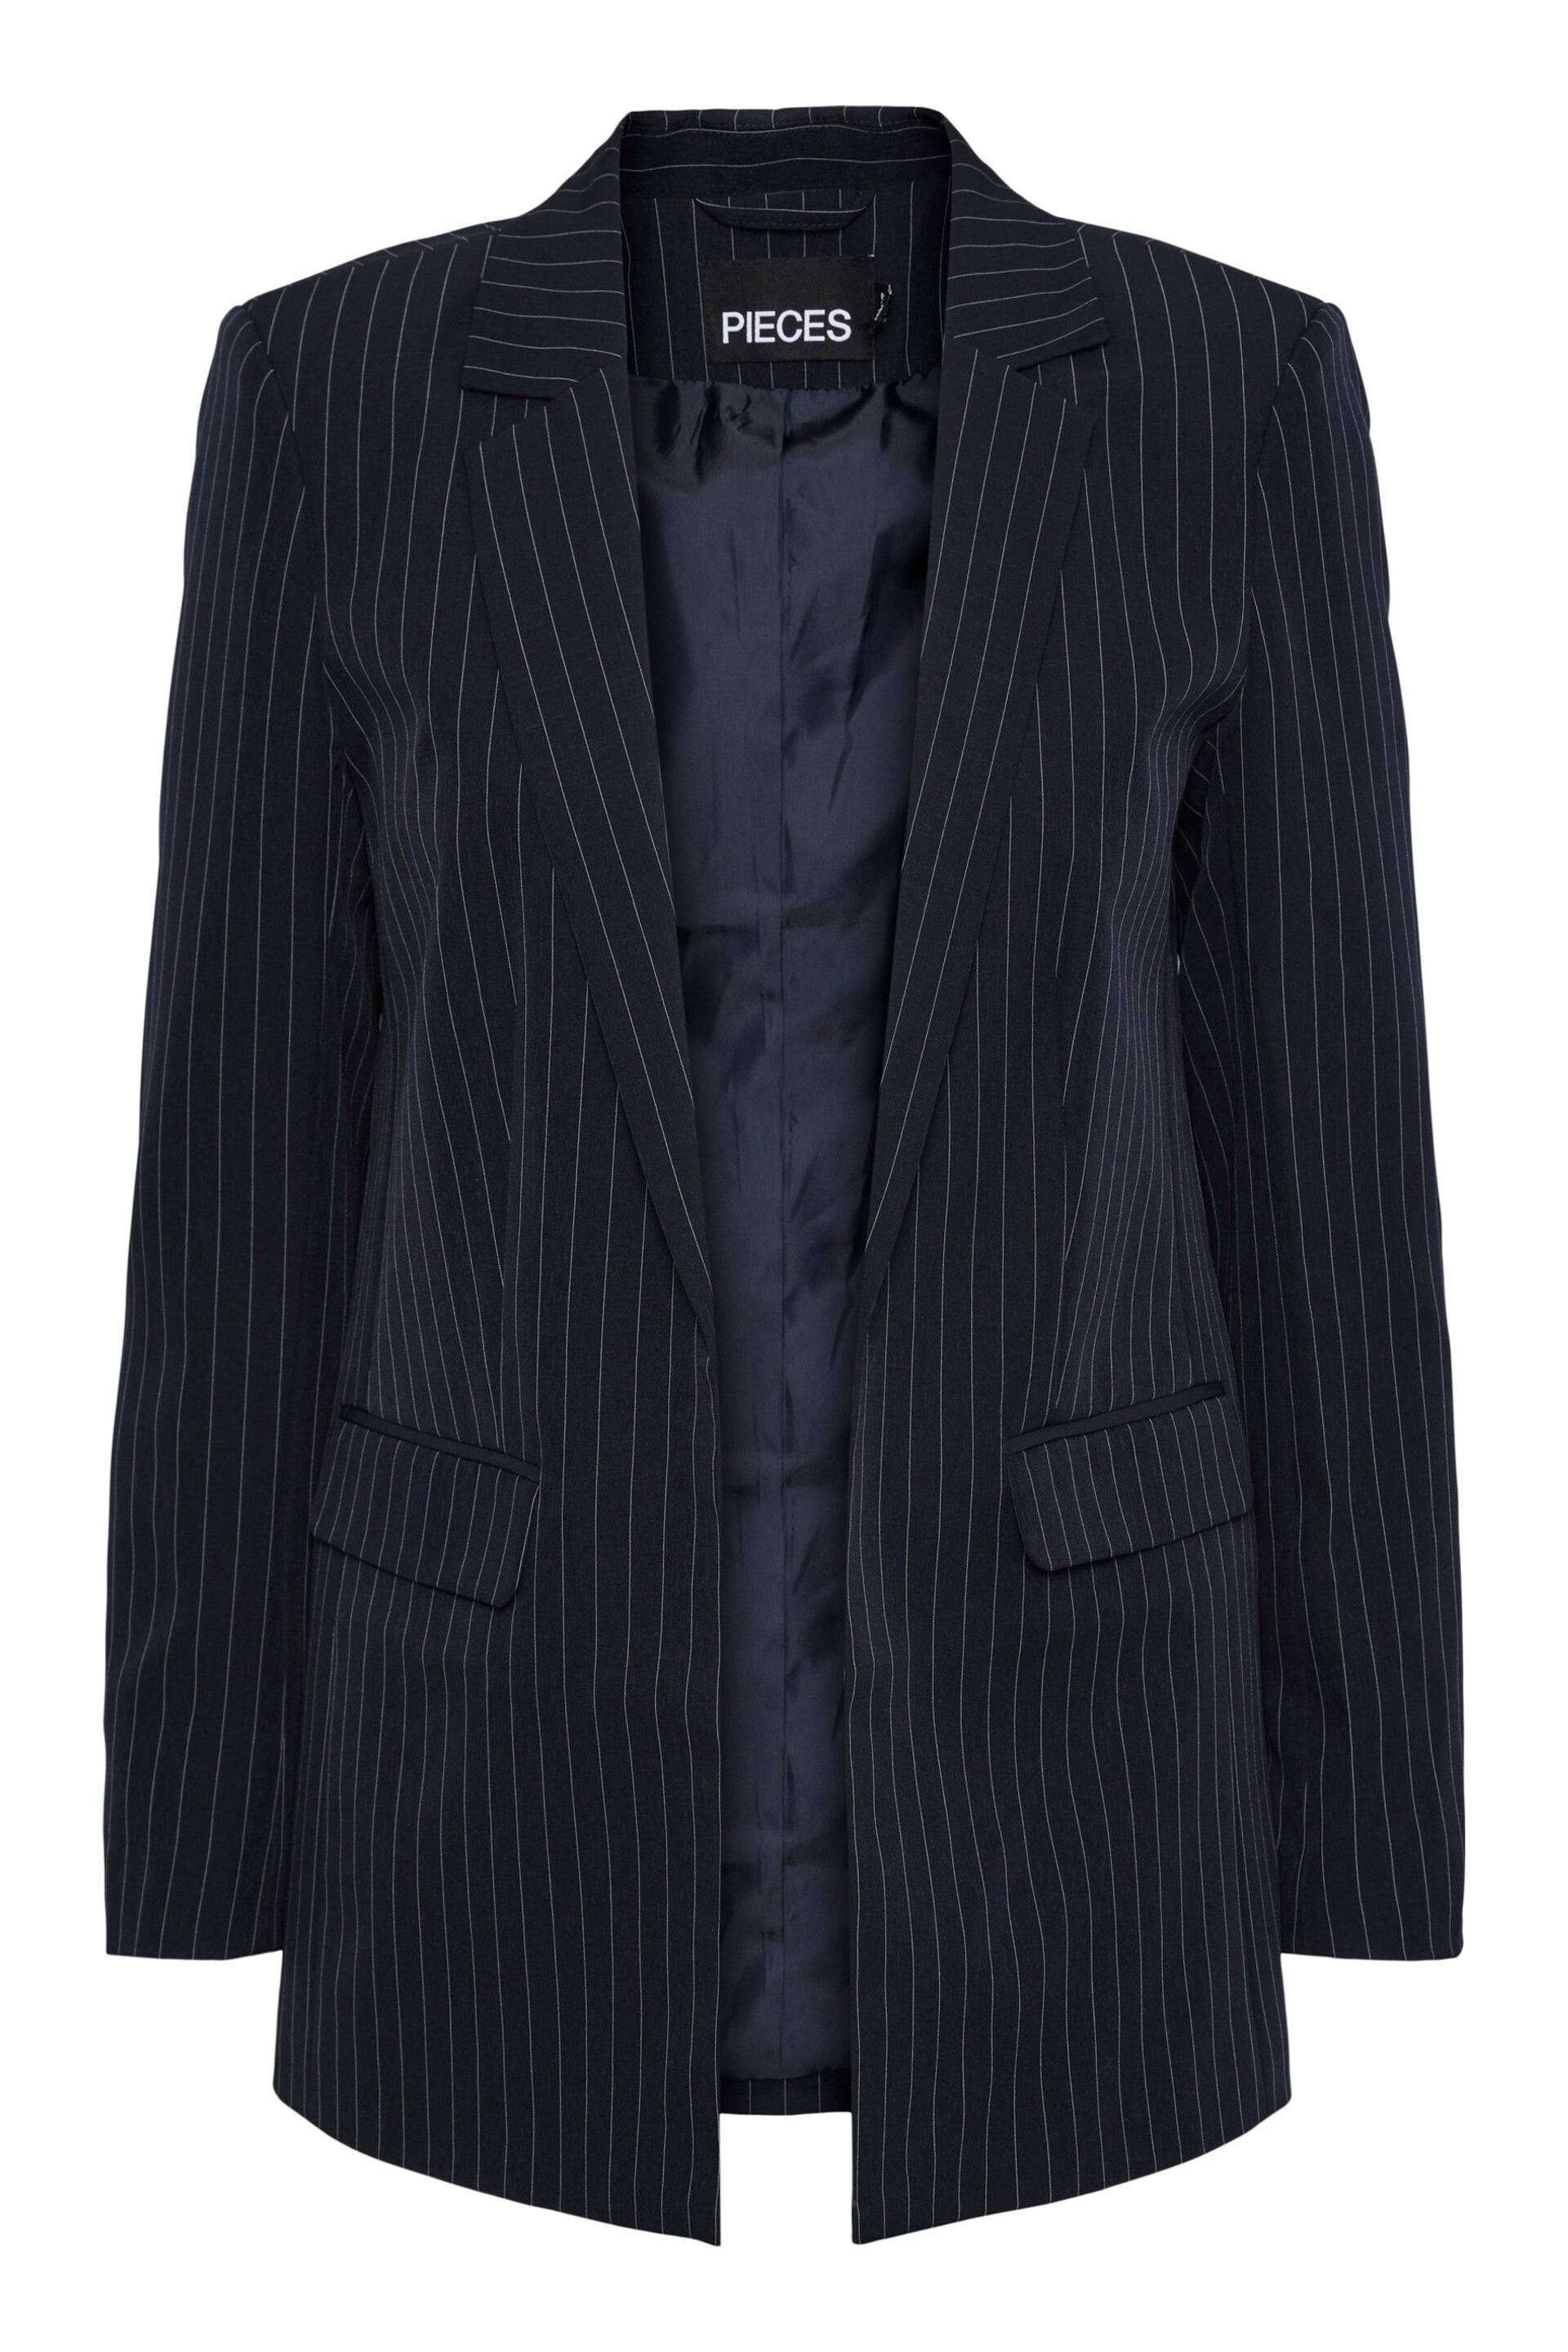 PIECES Blue Pinstripe Relaxed Fit Stretch Blazer - Image 6 of 6